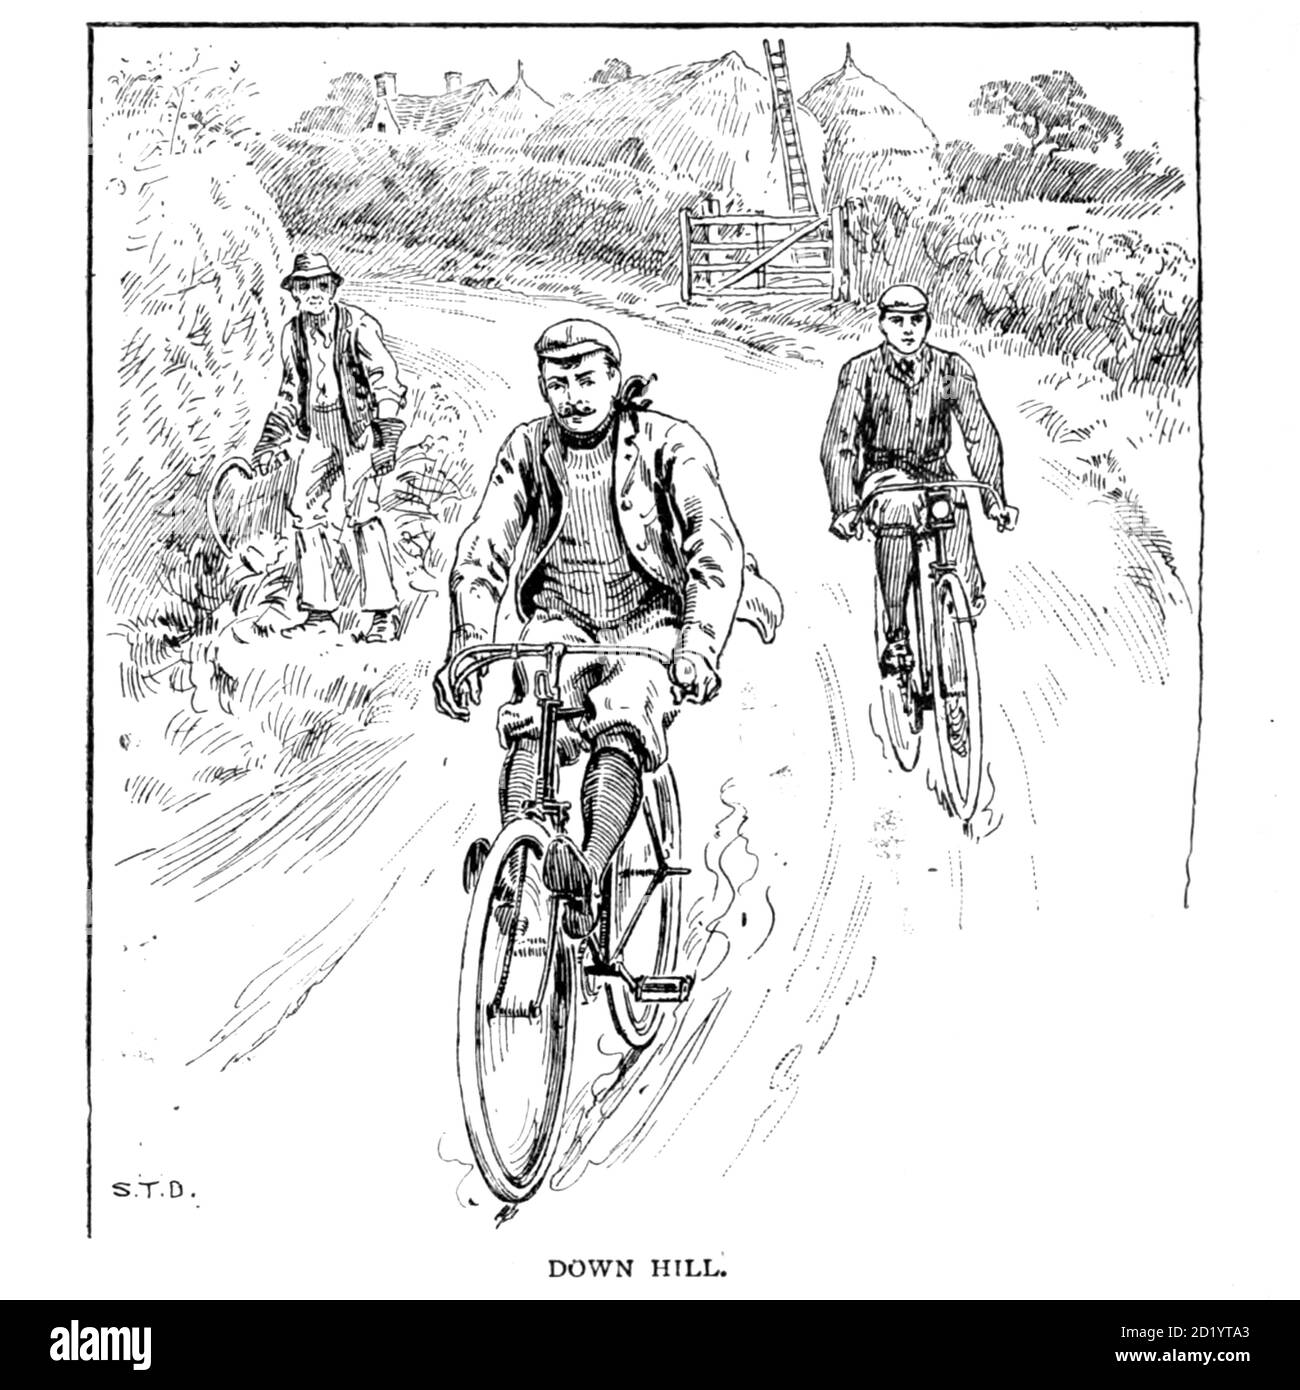 Downhill from 'Cycling' by The right Hon. Earl of Albemarle, William Coutts Keppel, (1832-1894) and George Lacy Hillier (1856-1941); Joseph Pennell (1857-1926) Published by London and Bombay : Longmans, Green and co. in 1896. The Badminton Library Stock Photo